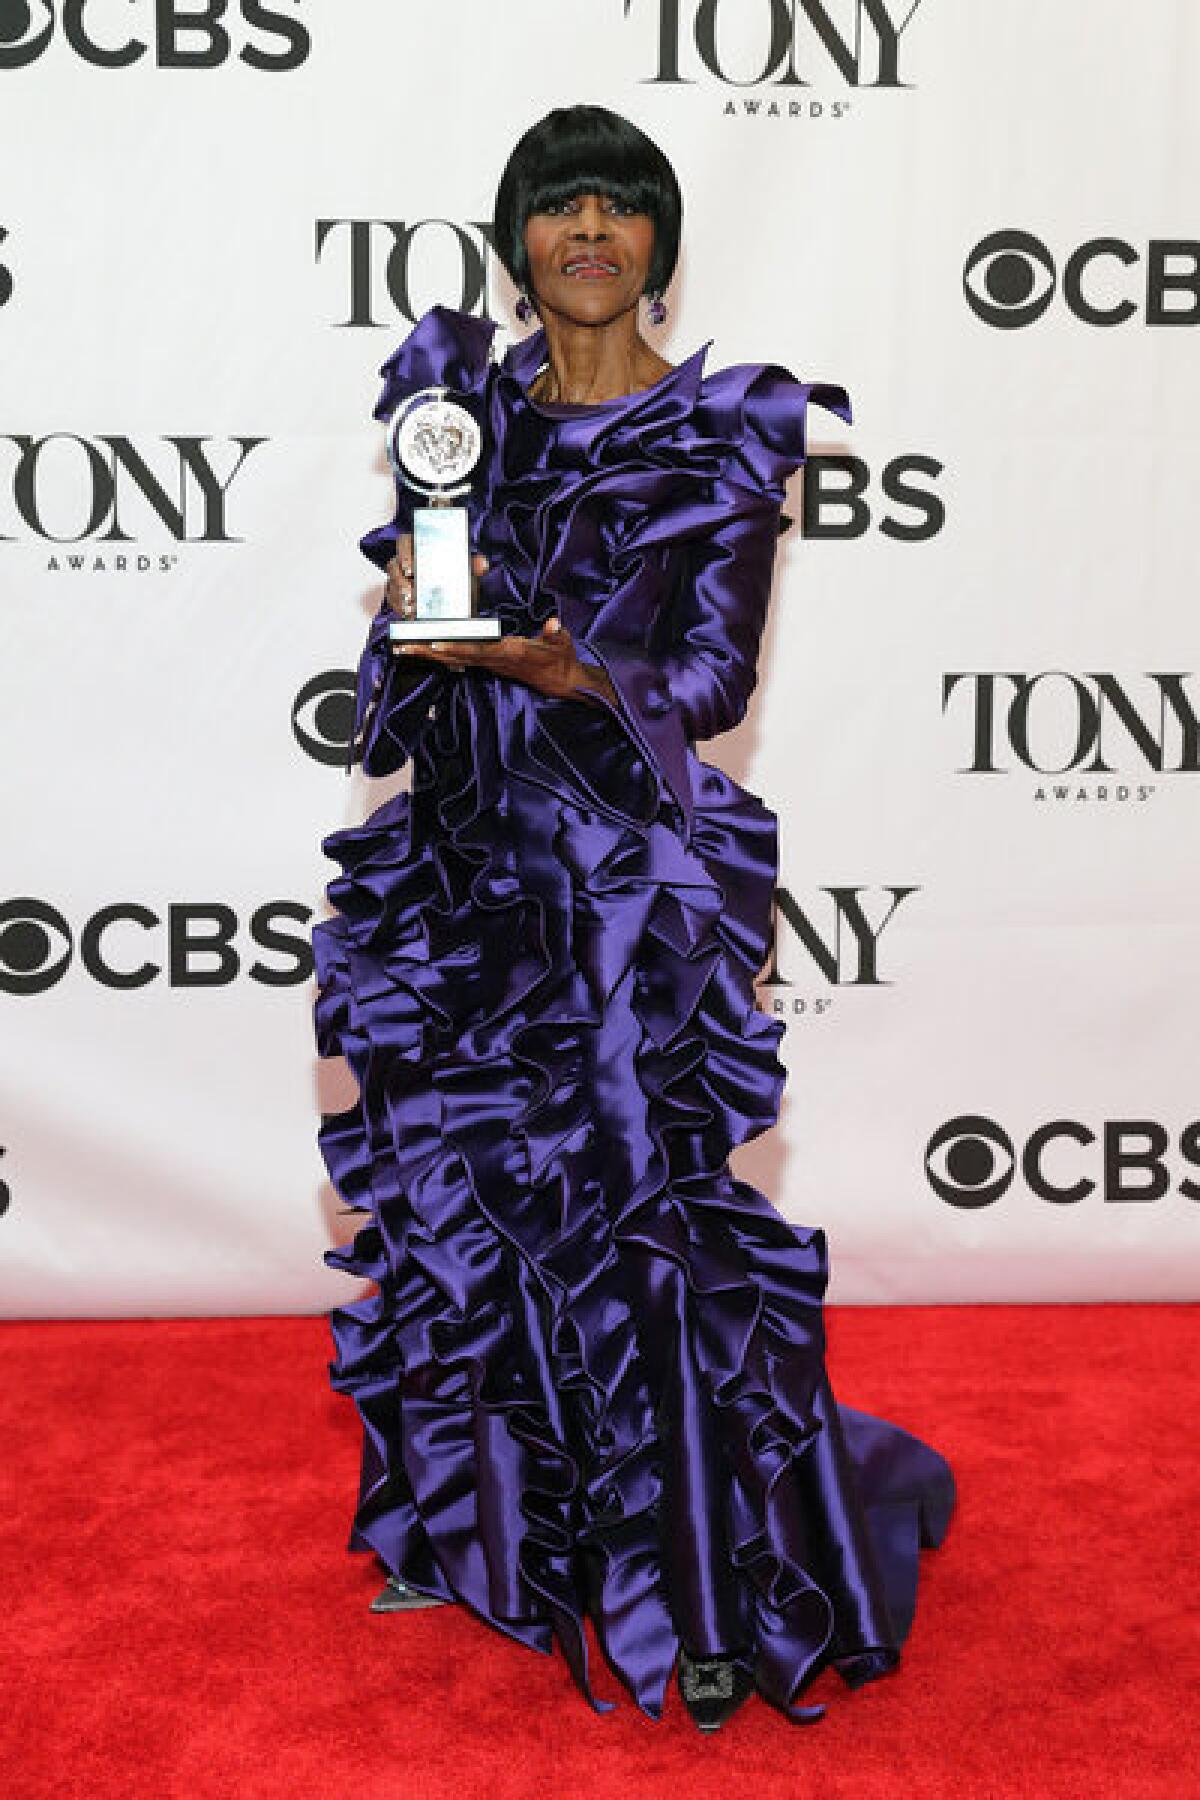 Cicely Tyson shows off her Tony for lead actress in a play for "The Trip to Bountiful."